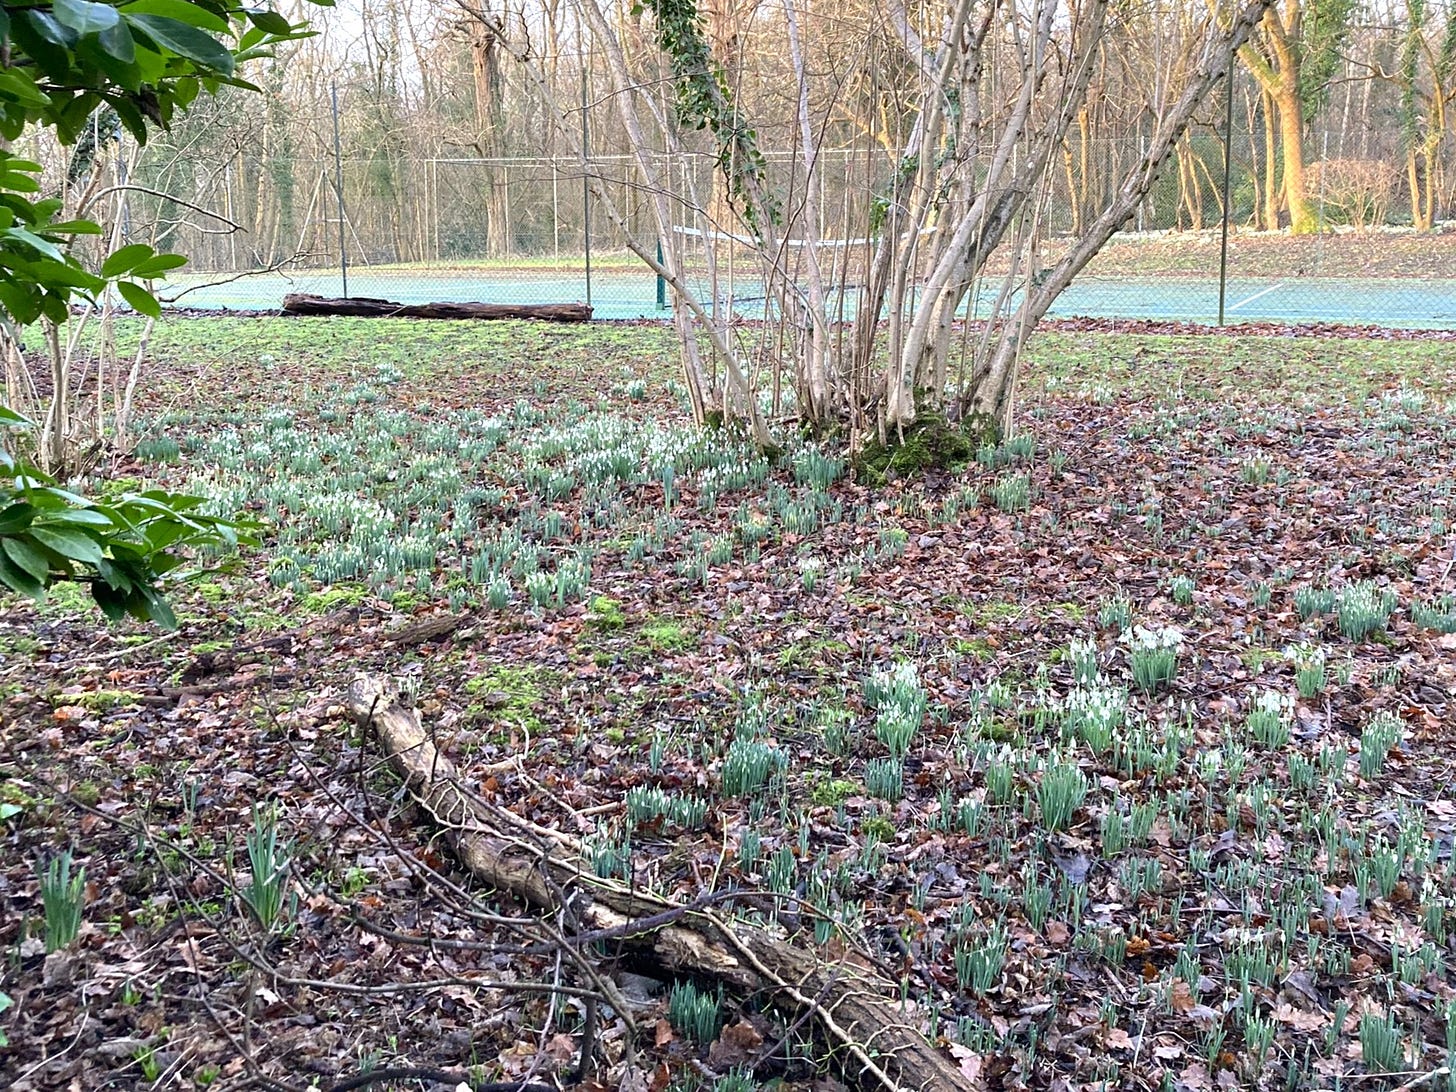 A grove of snowdrops growing through the dried leaves of winter.